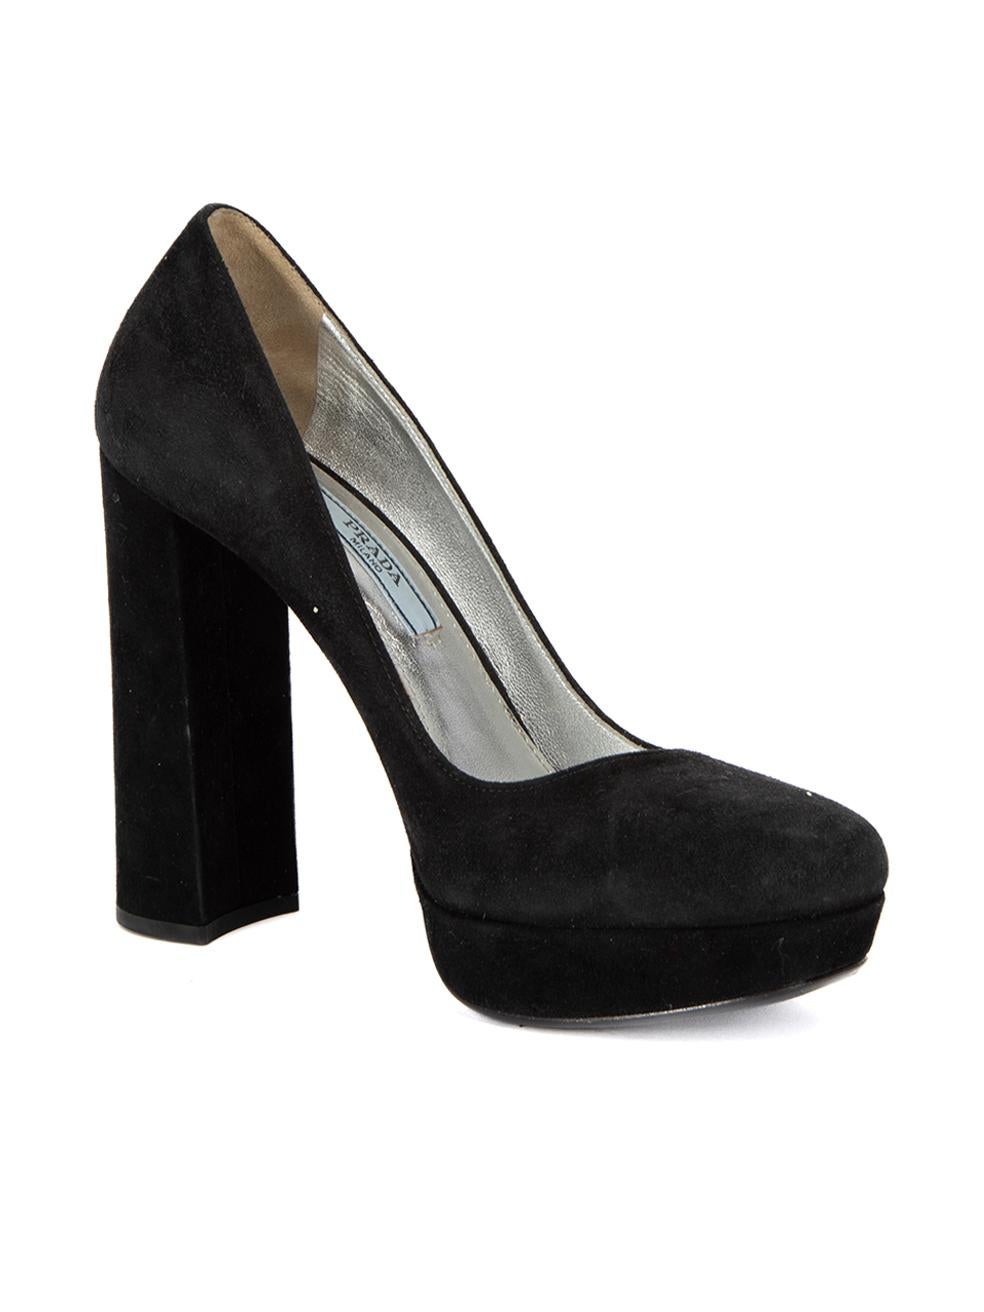 CONDITION is Good. General wear to shoes is evident. Overall wear to suede material and scuffs to heel stems, especially on the right shoe, can be seen on this used Prada designer resale item.   Details  Black Suede Slip on heels Round toe Platform